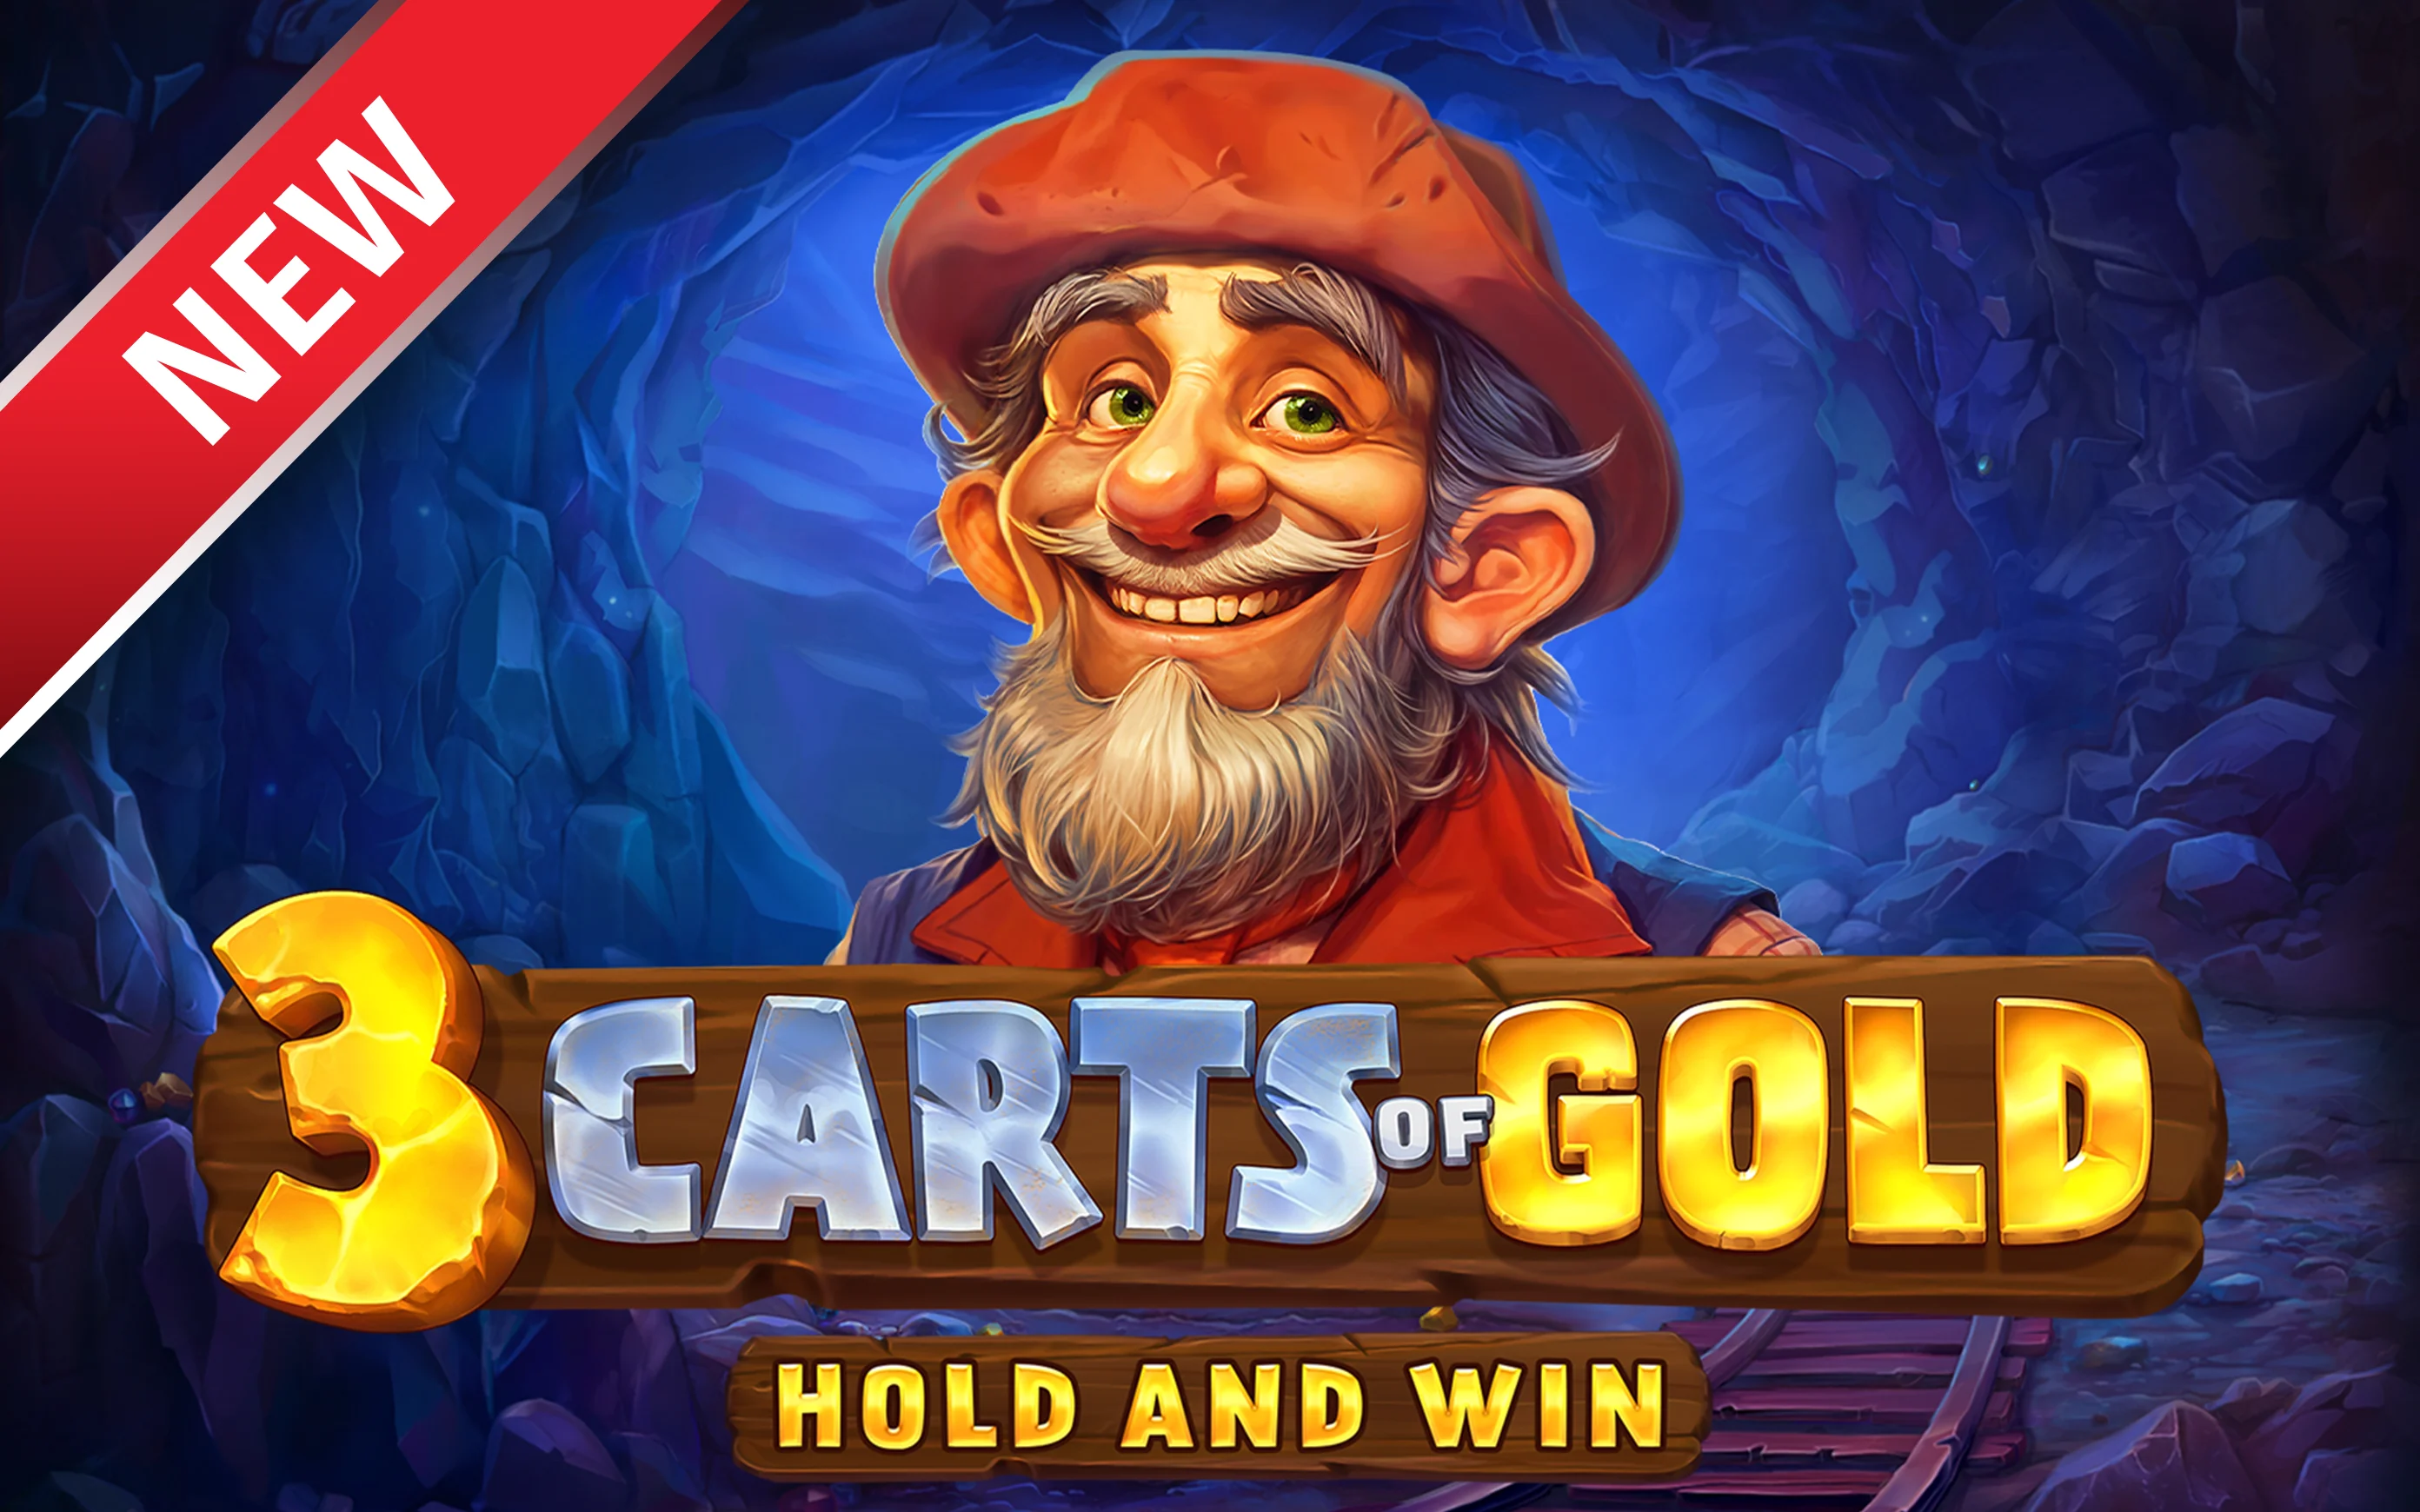 Gioca a 3 Carts of Gold: Hold and Win sul casino online Starcasino.be